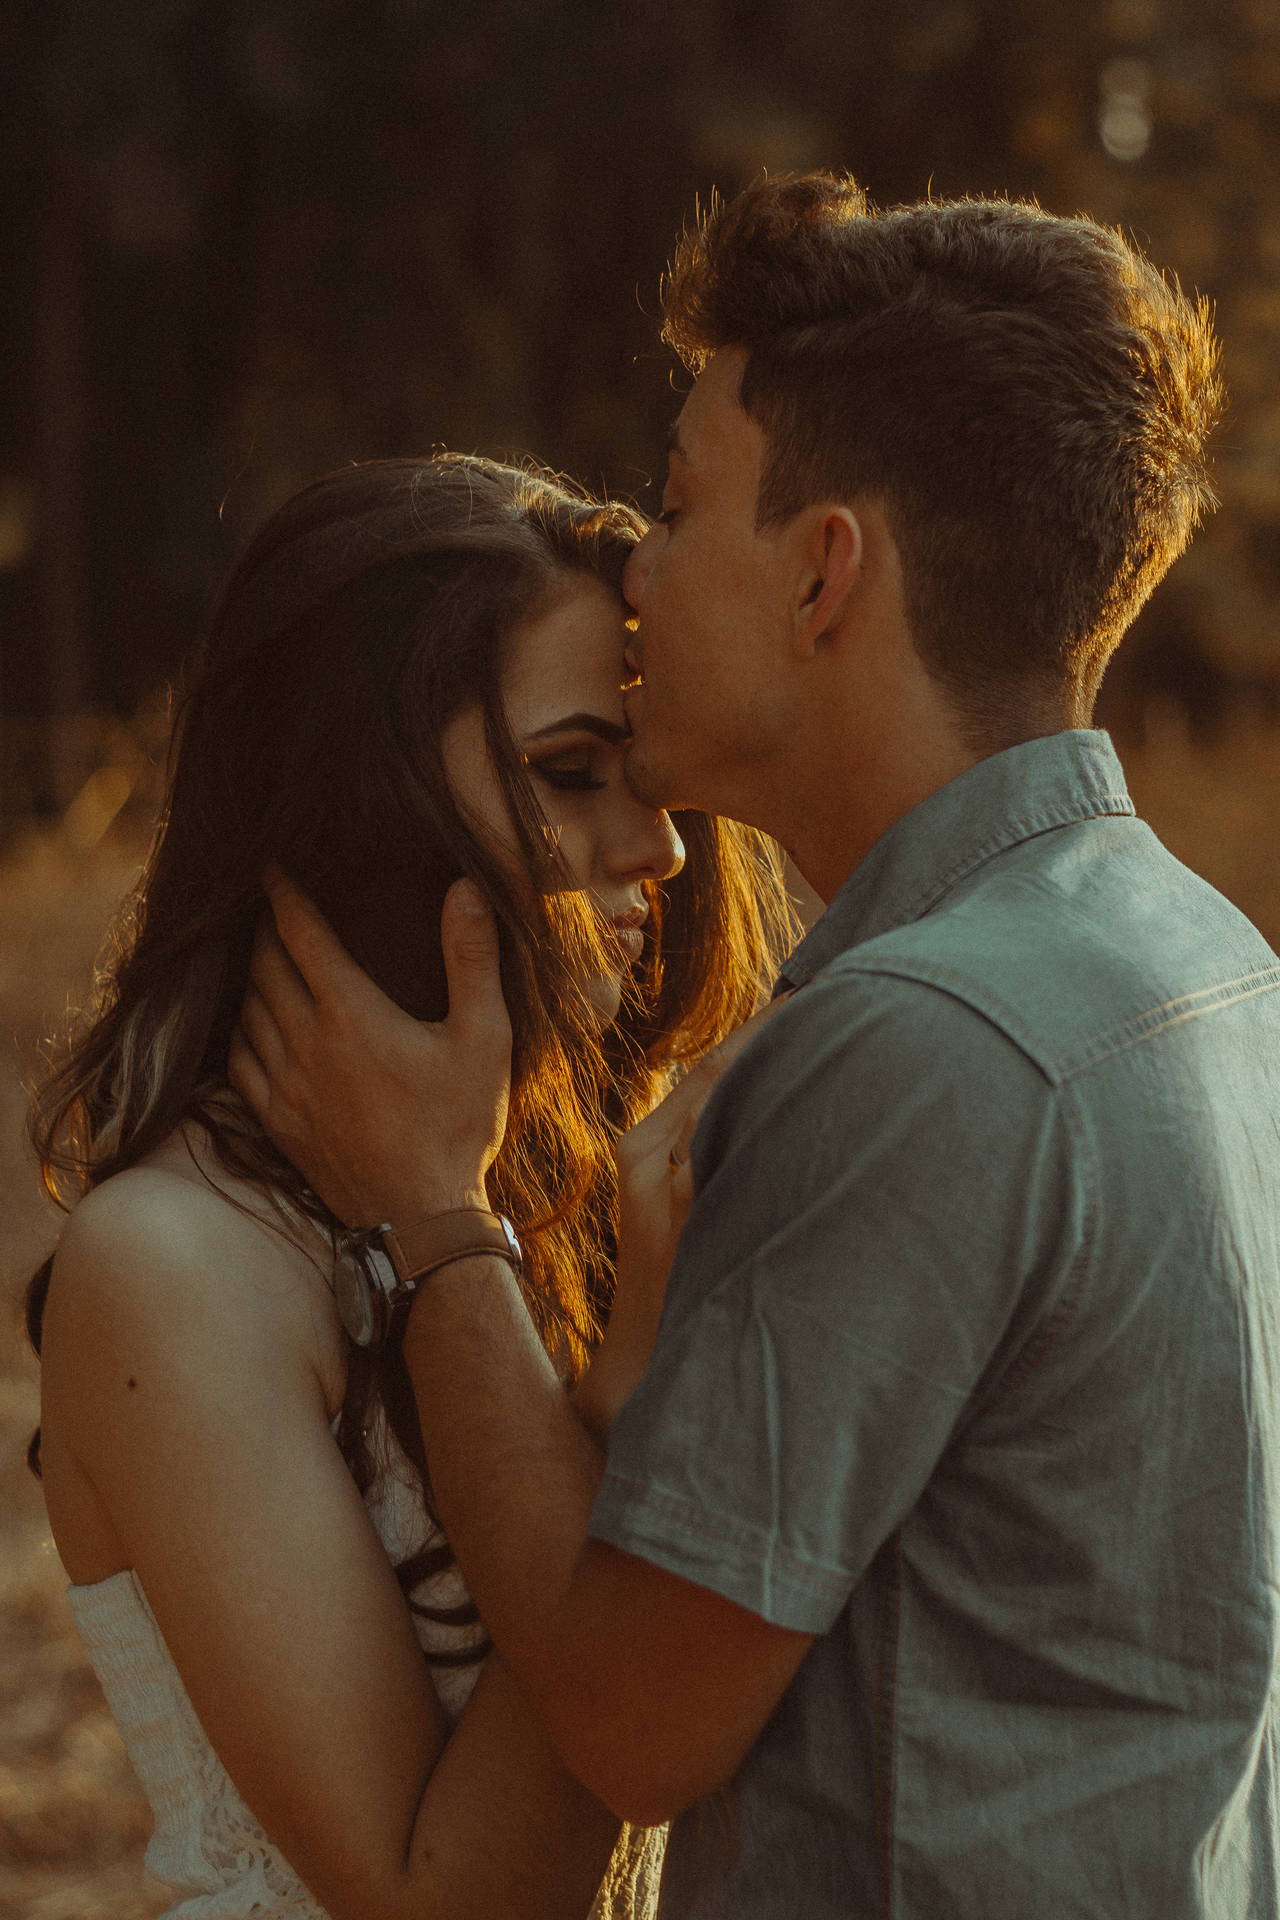 Download Romantic Couple Forehead Kiss Wallpaper 